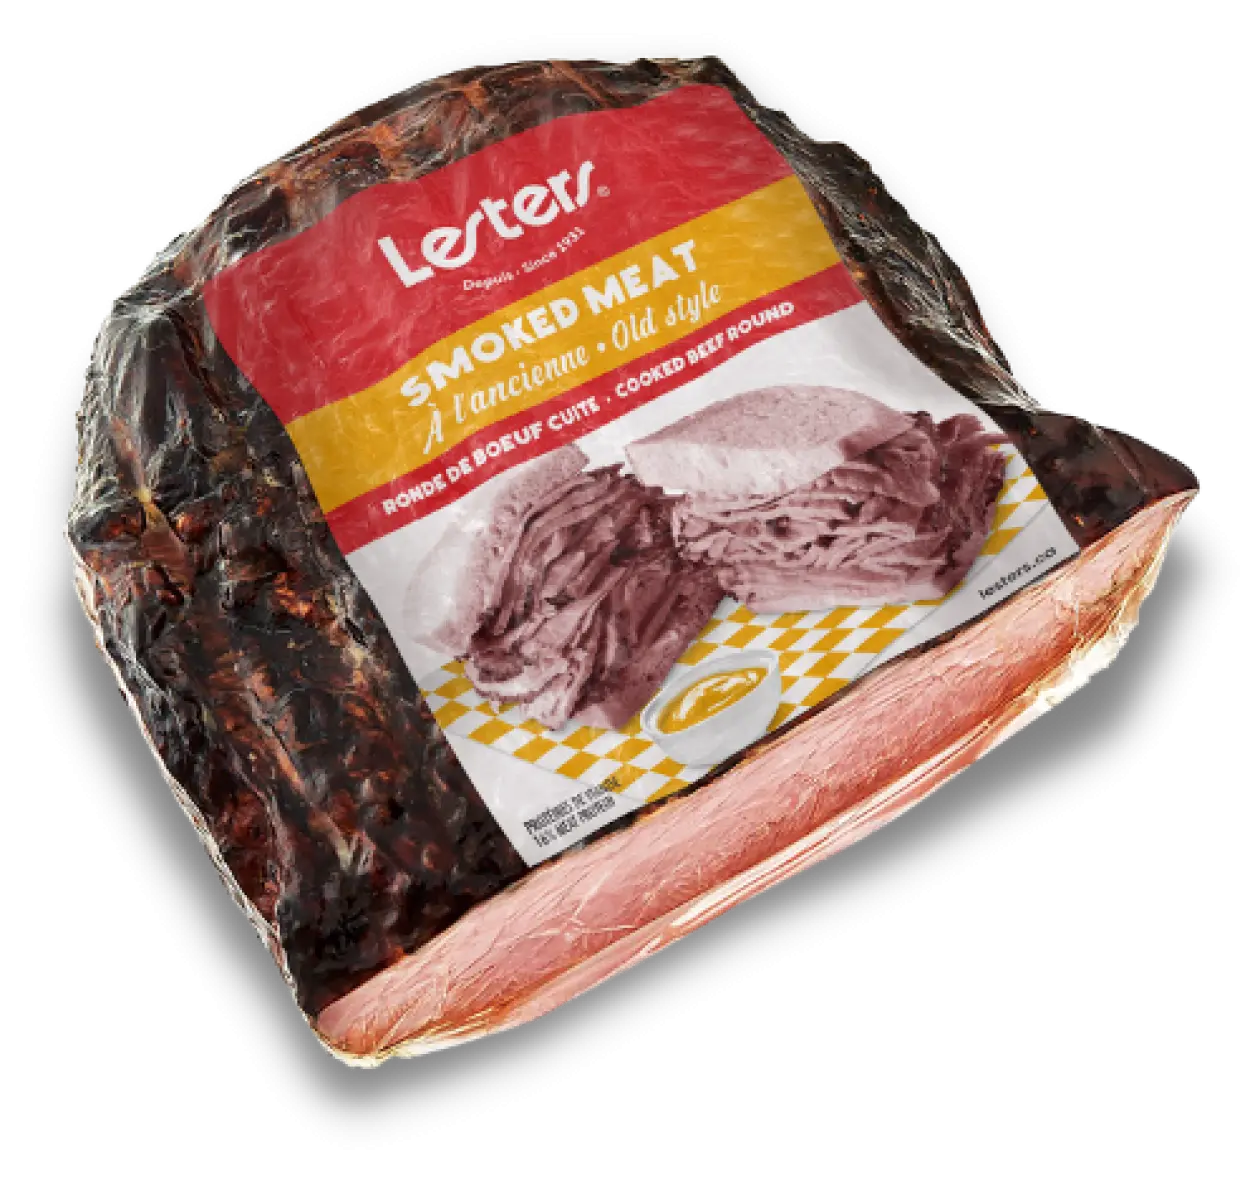 lesters smoked meat - How do you cook Lester's smoked meat